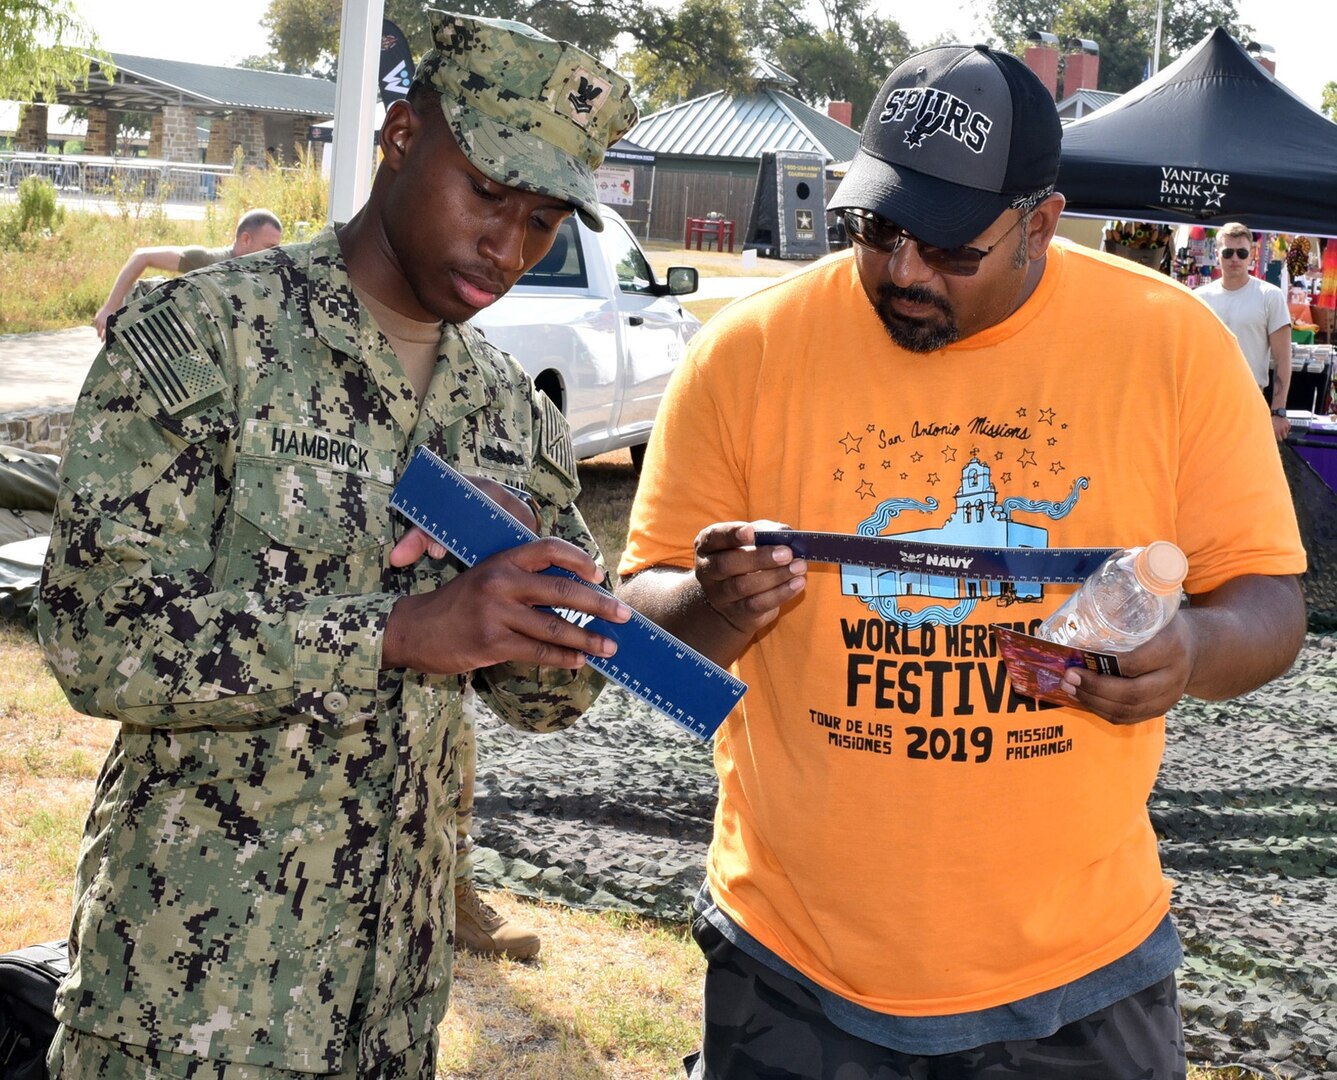 Petty Officer 2nd Class Mark Hambrick, assigned to Navy Recruiting District San Antonio, discusses the various rates of the Navy with an attendee of Mission Pachanga during the annual World Heritage Festival held at Mission Park Pavilion Sept. 7.